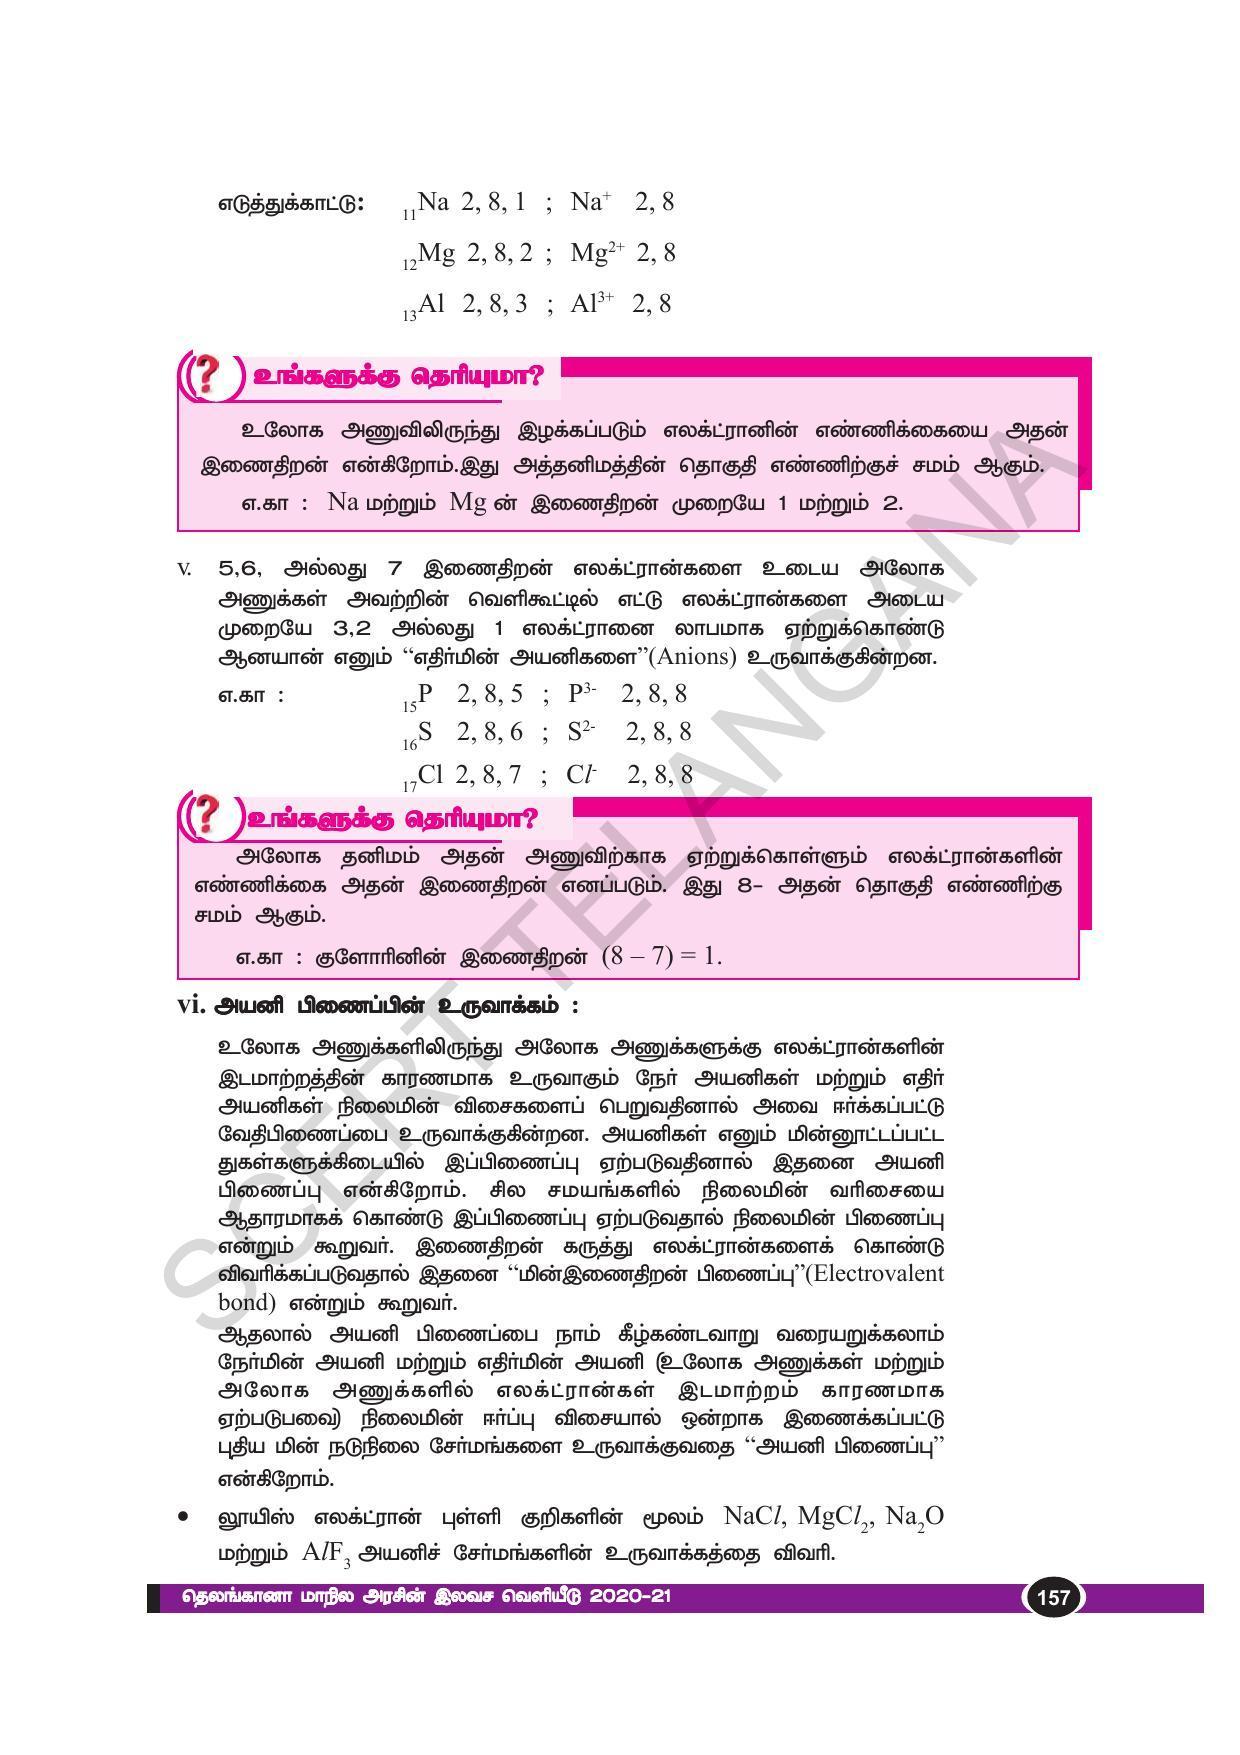 TS SCERT Class 10 Physical Science(Tamil Medium) Text Book - Page 169